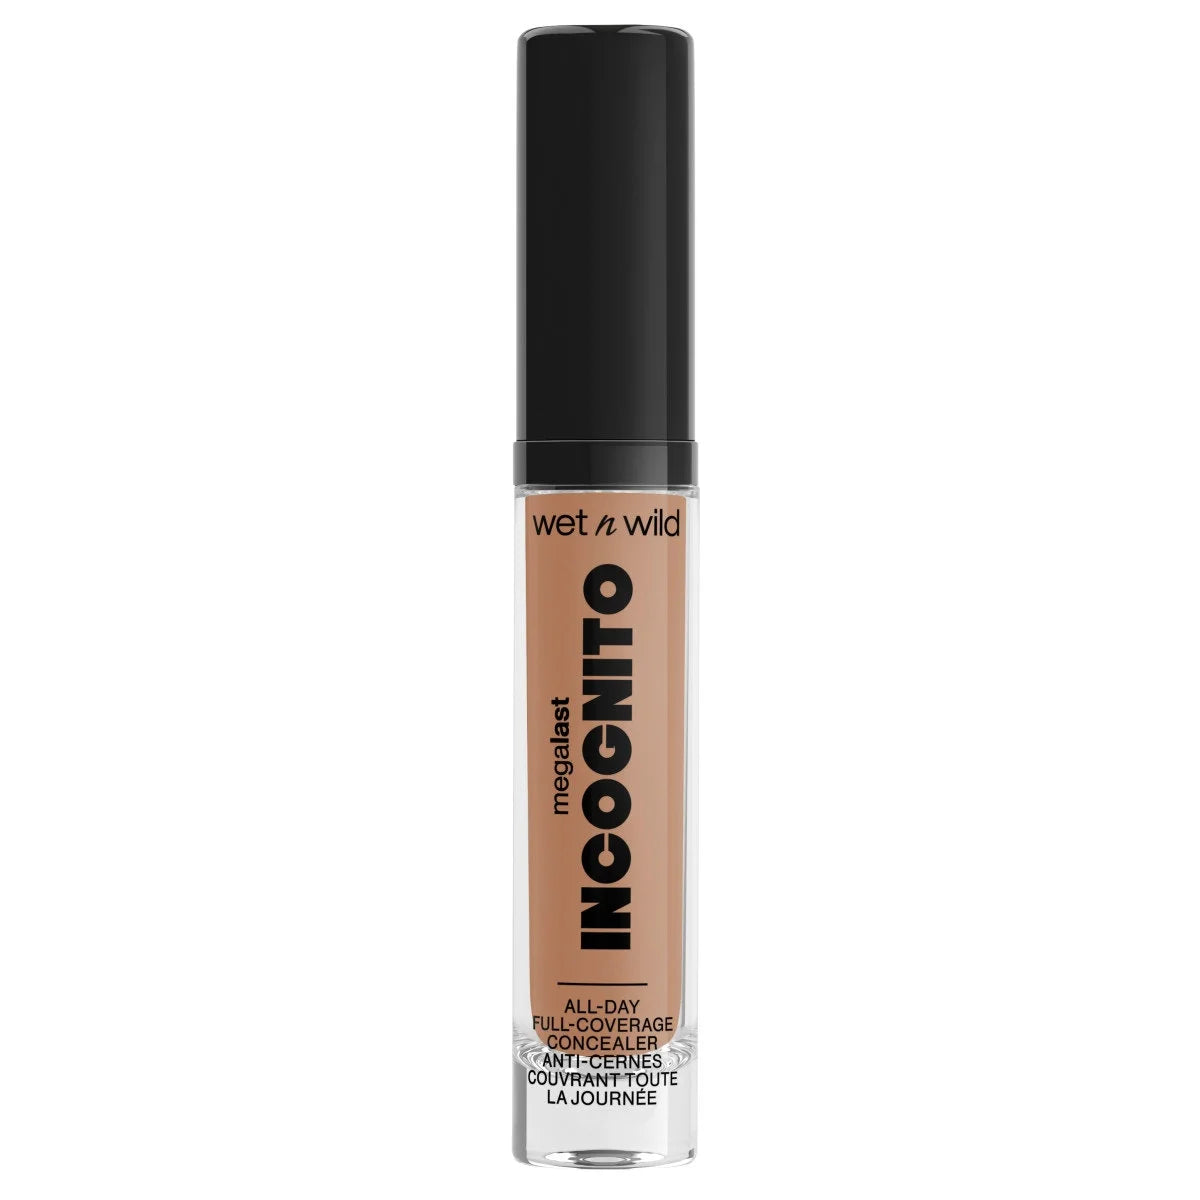 WET N WILD MegaLast Incognito All-Day Full Coverage Concealer Light Medium